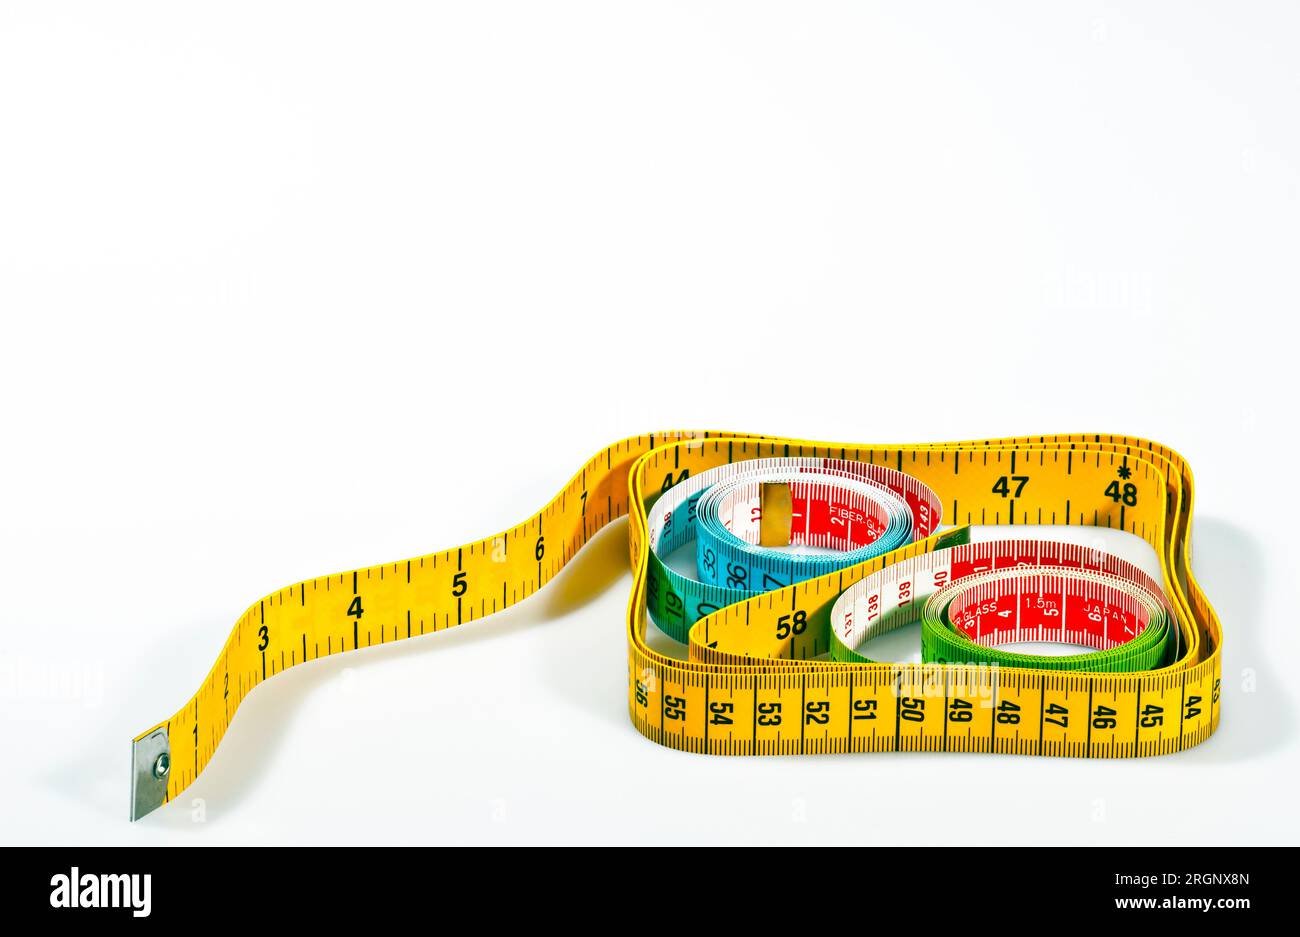 3d Rendering Of A Yellow Flexible Sewing Tape Measure In A